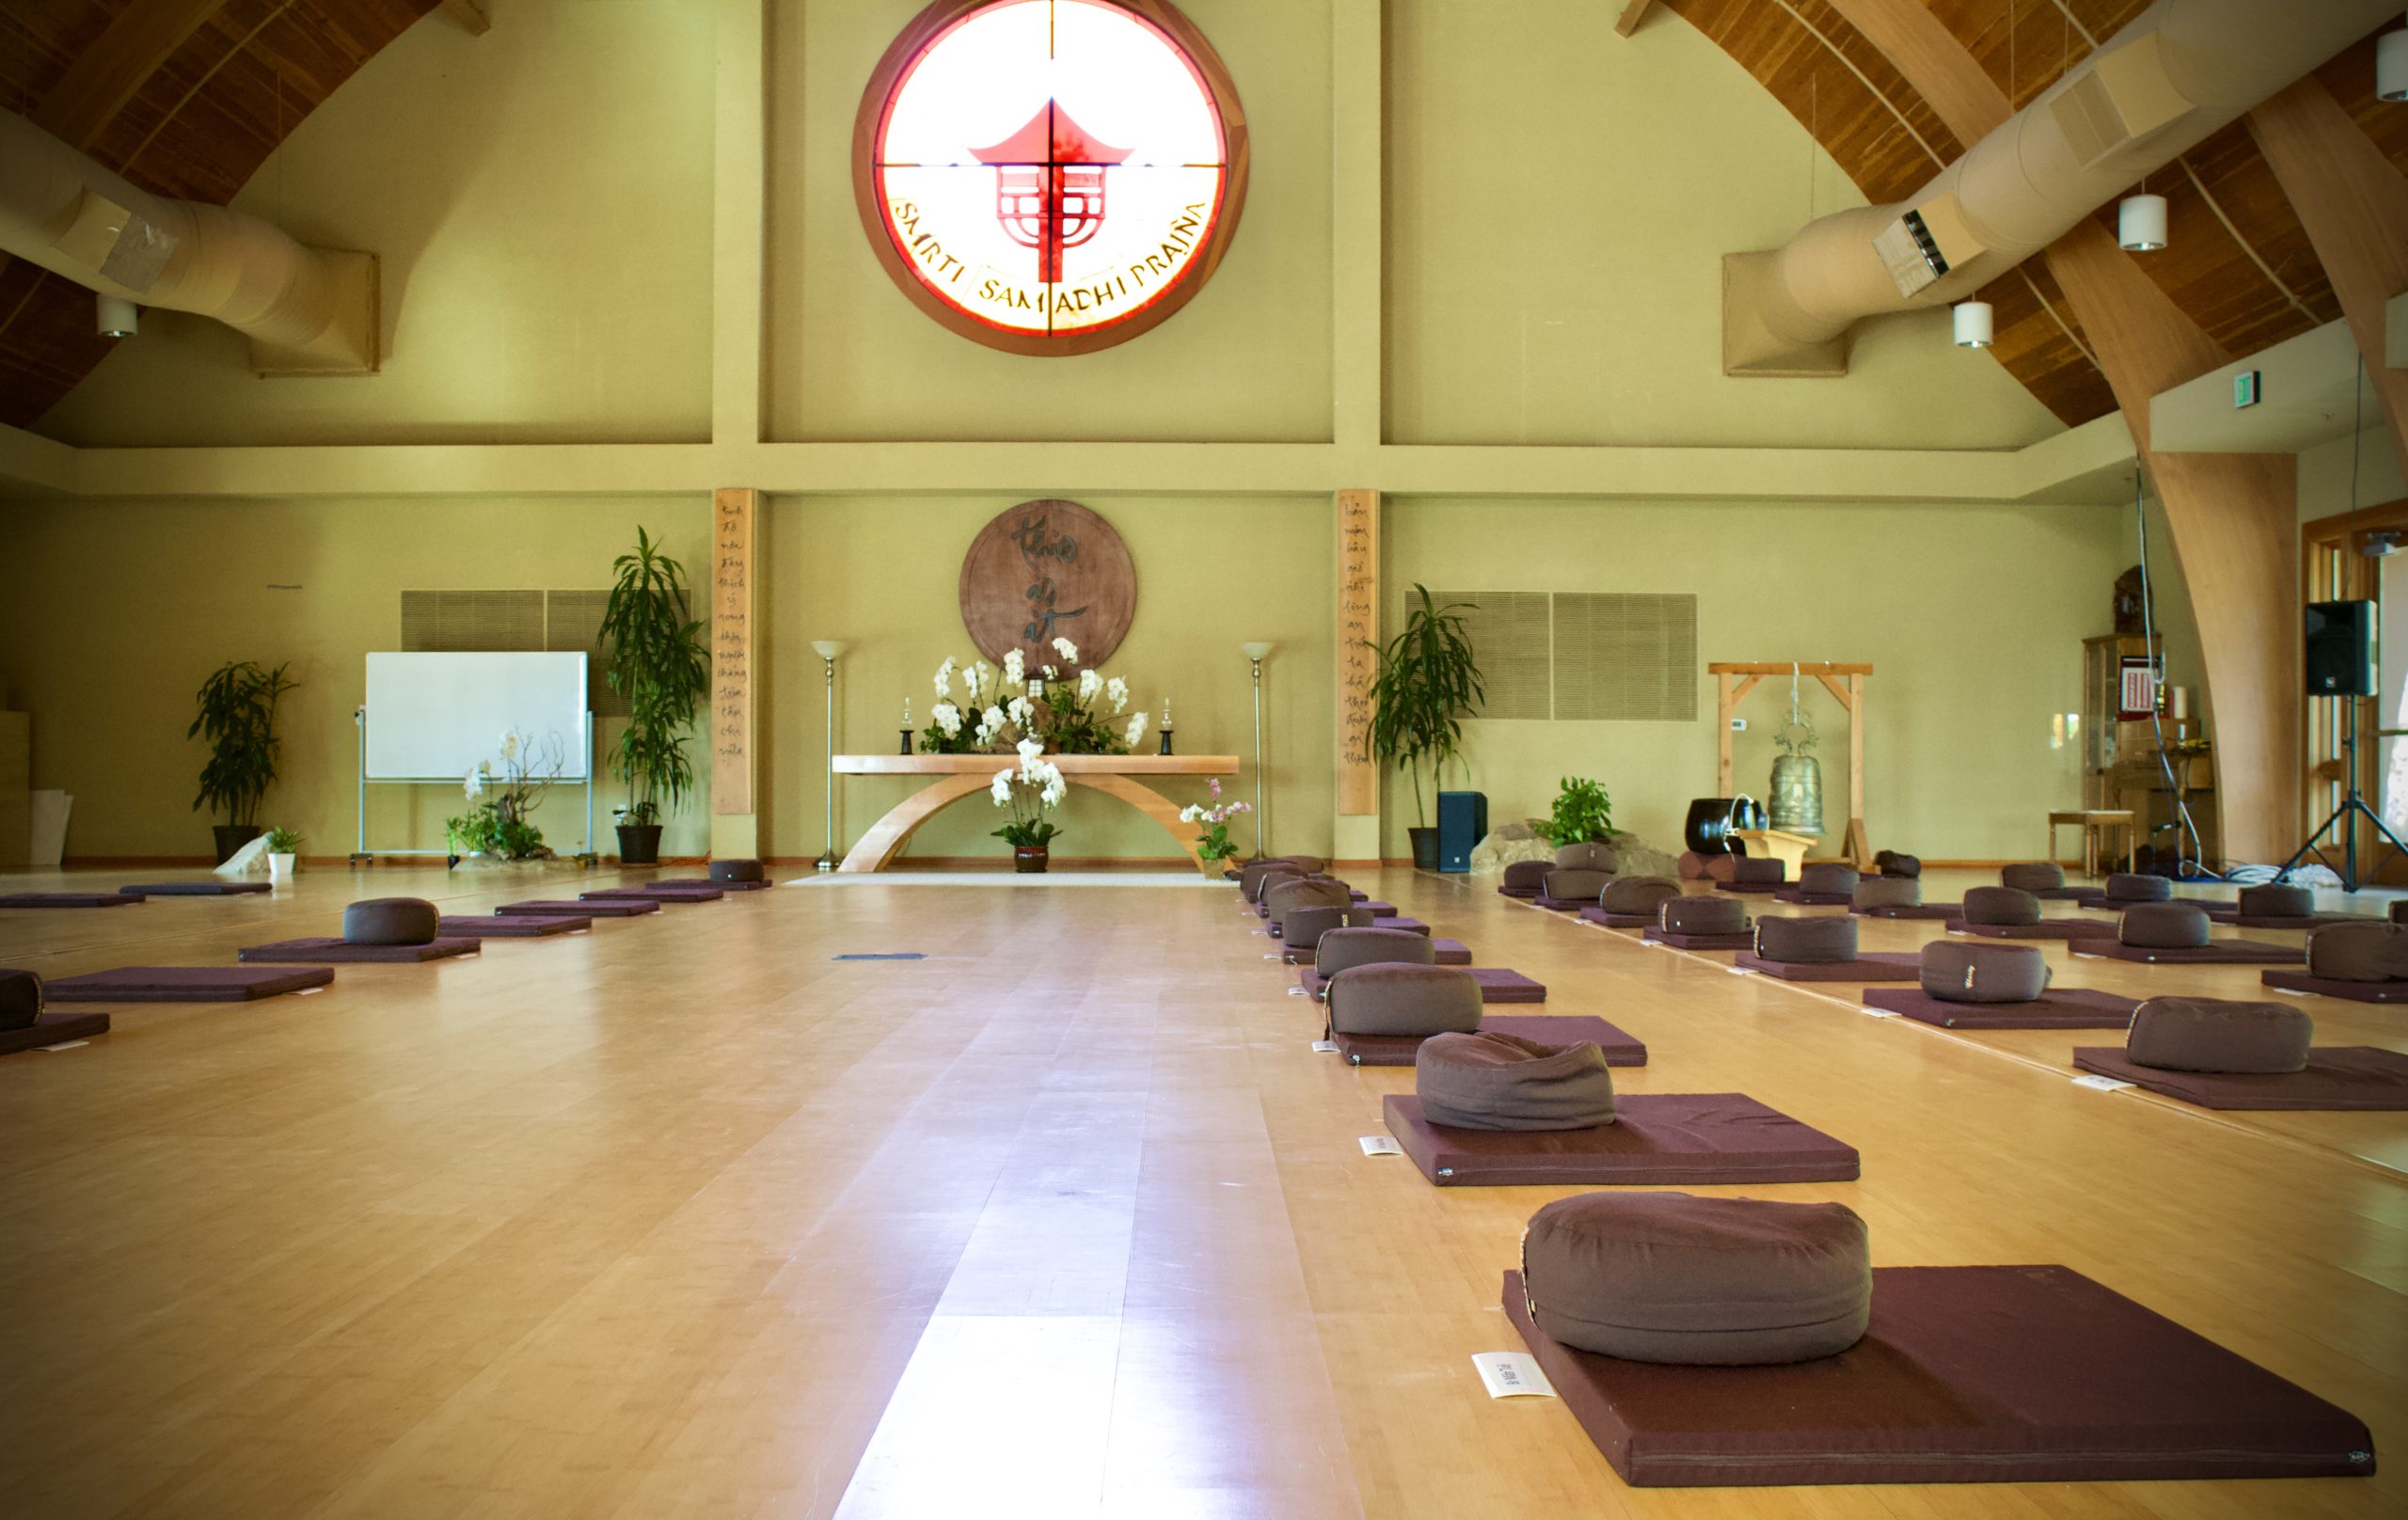 In-person Day of Mindfulness: Registration Required